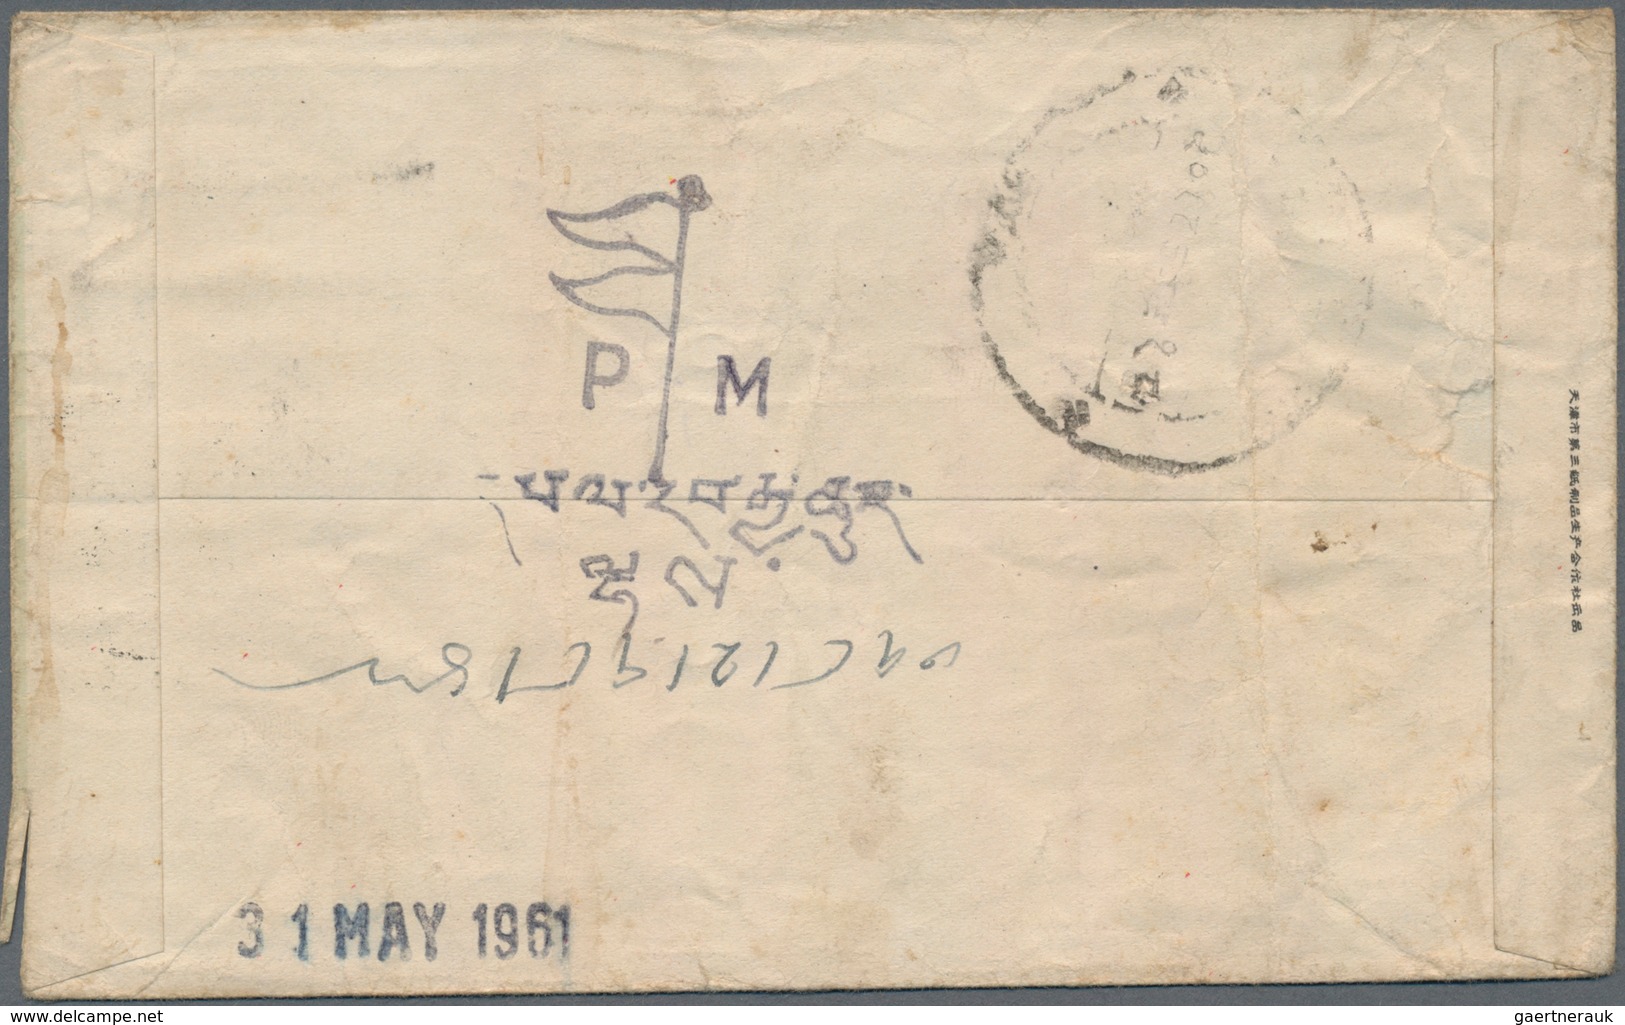 China - Volksrepublik: 1955/61, 2 Covers, Definitives 8 F. Orange Foundry Worker Tied "Xizang Lasa" - Covers & Documents